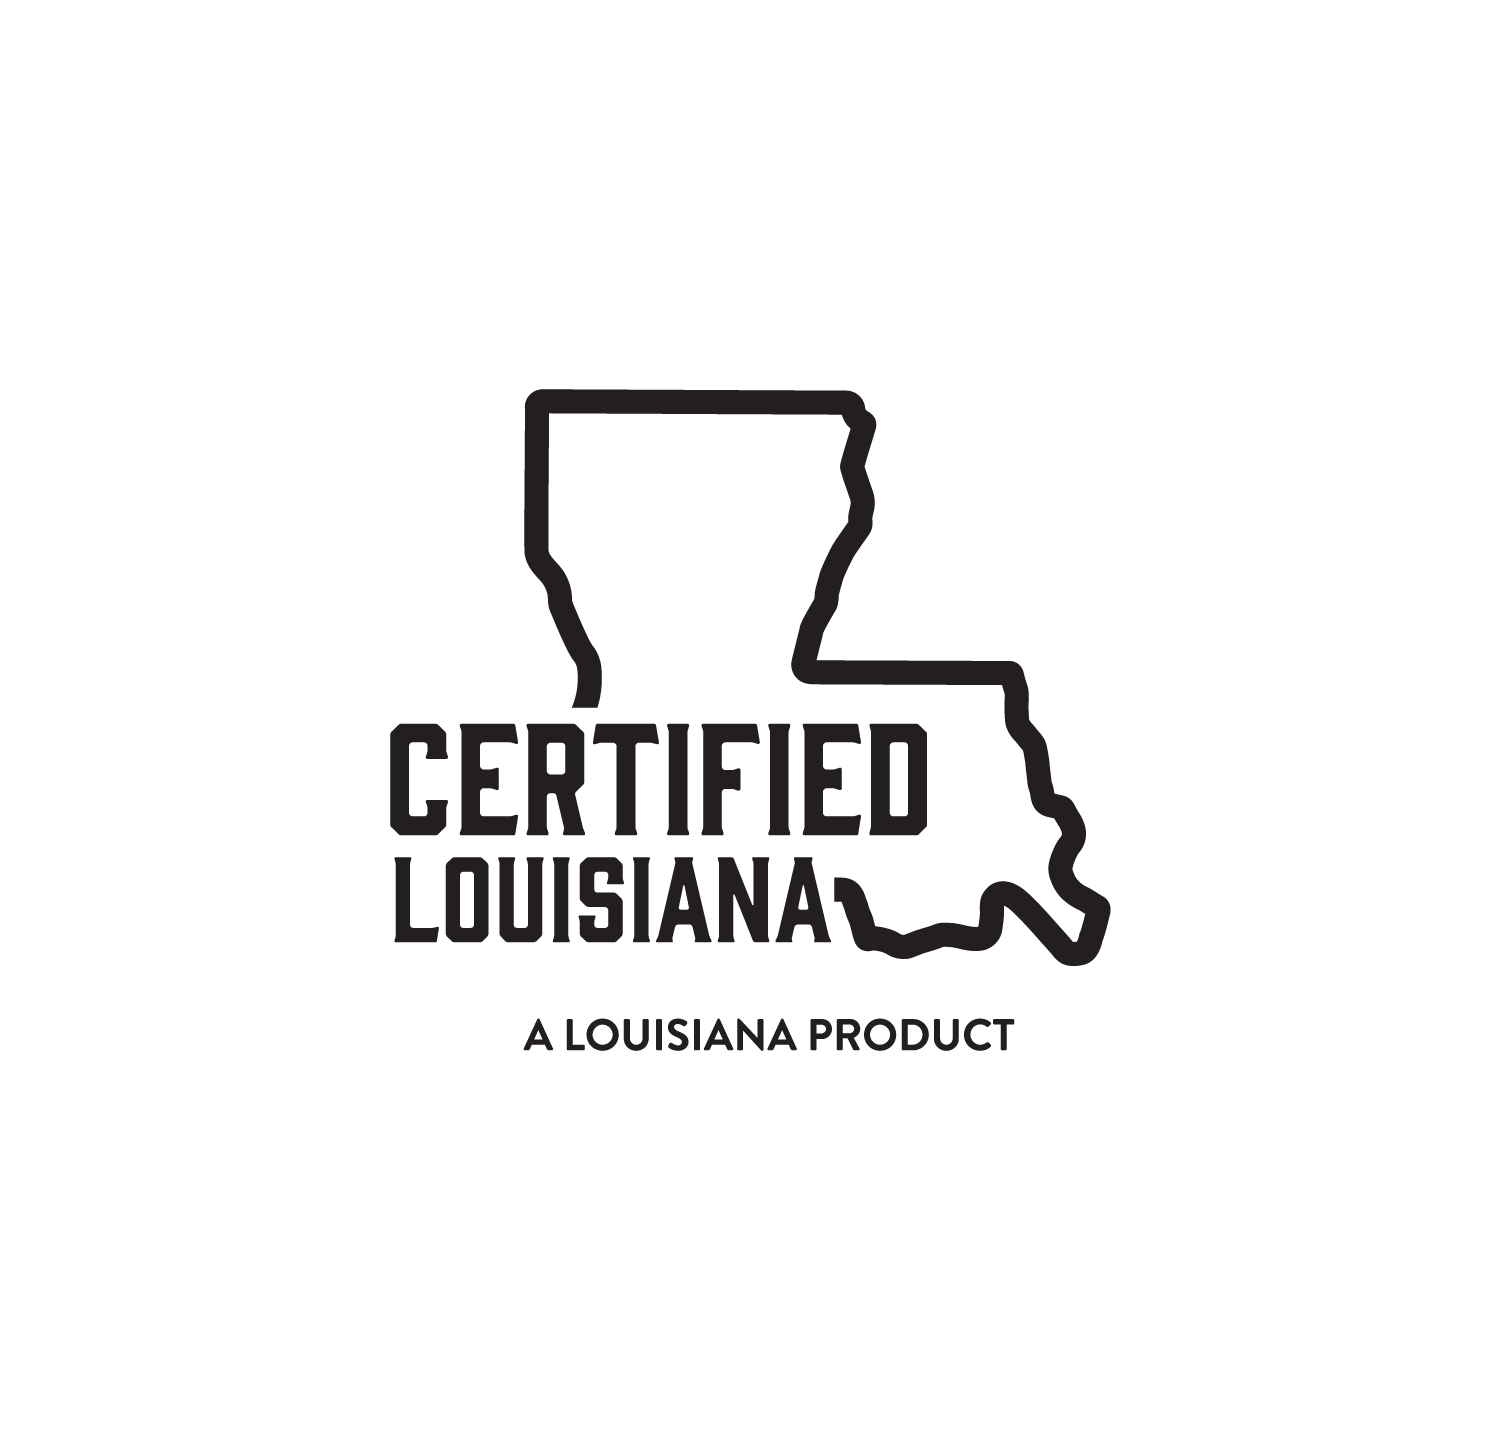 Lousisiana Logo - Agriculture dept. rolls out new 'Certified Louisiana' logos